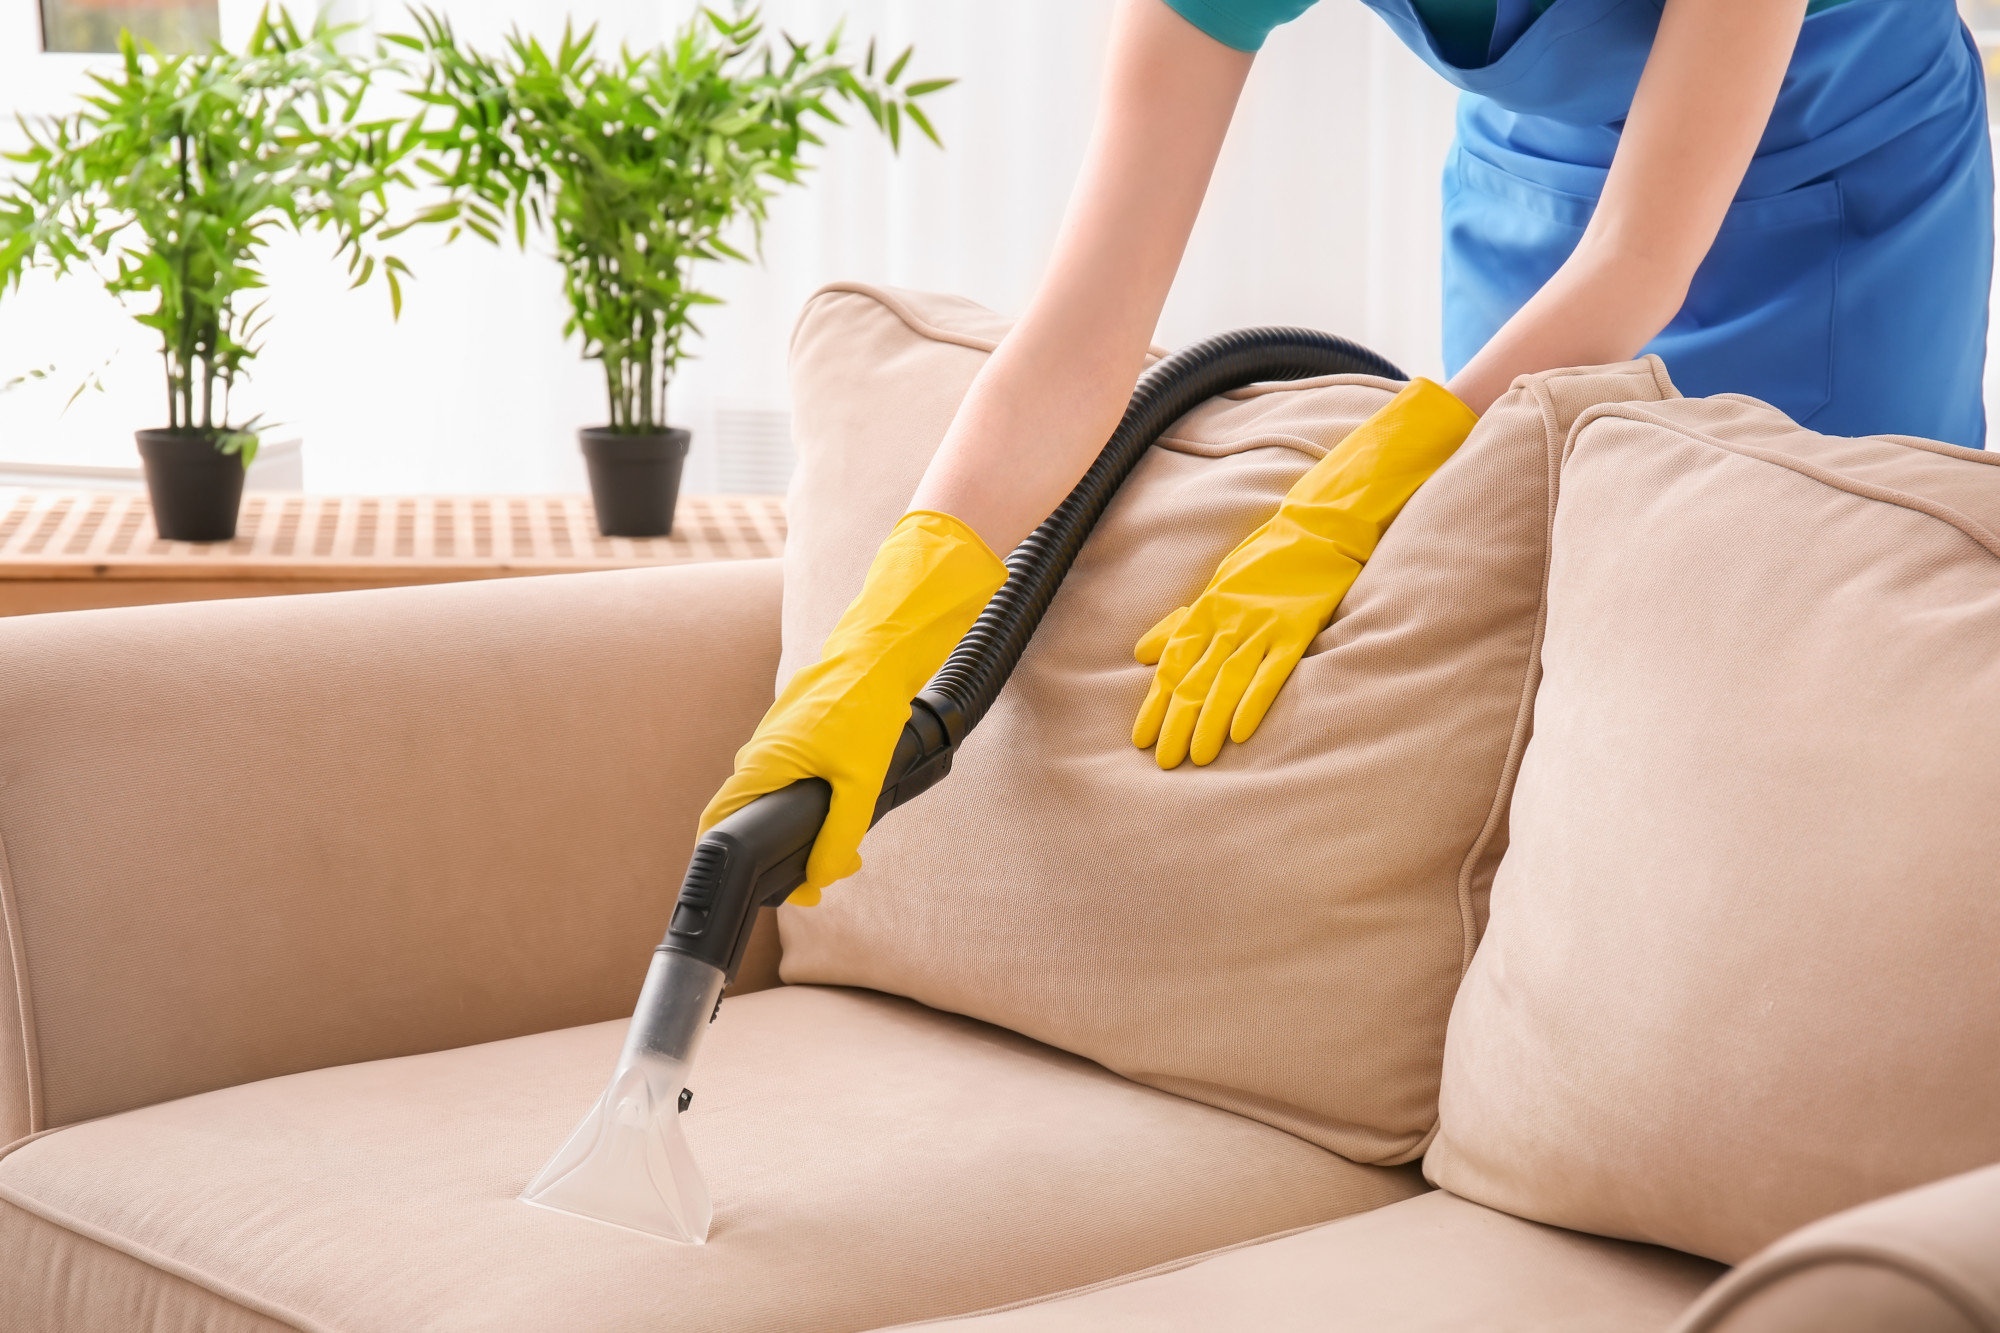 How To Clean A Smelly Couch, Can I Use Baking Soda To Clean My Sofa